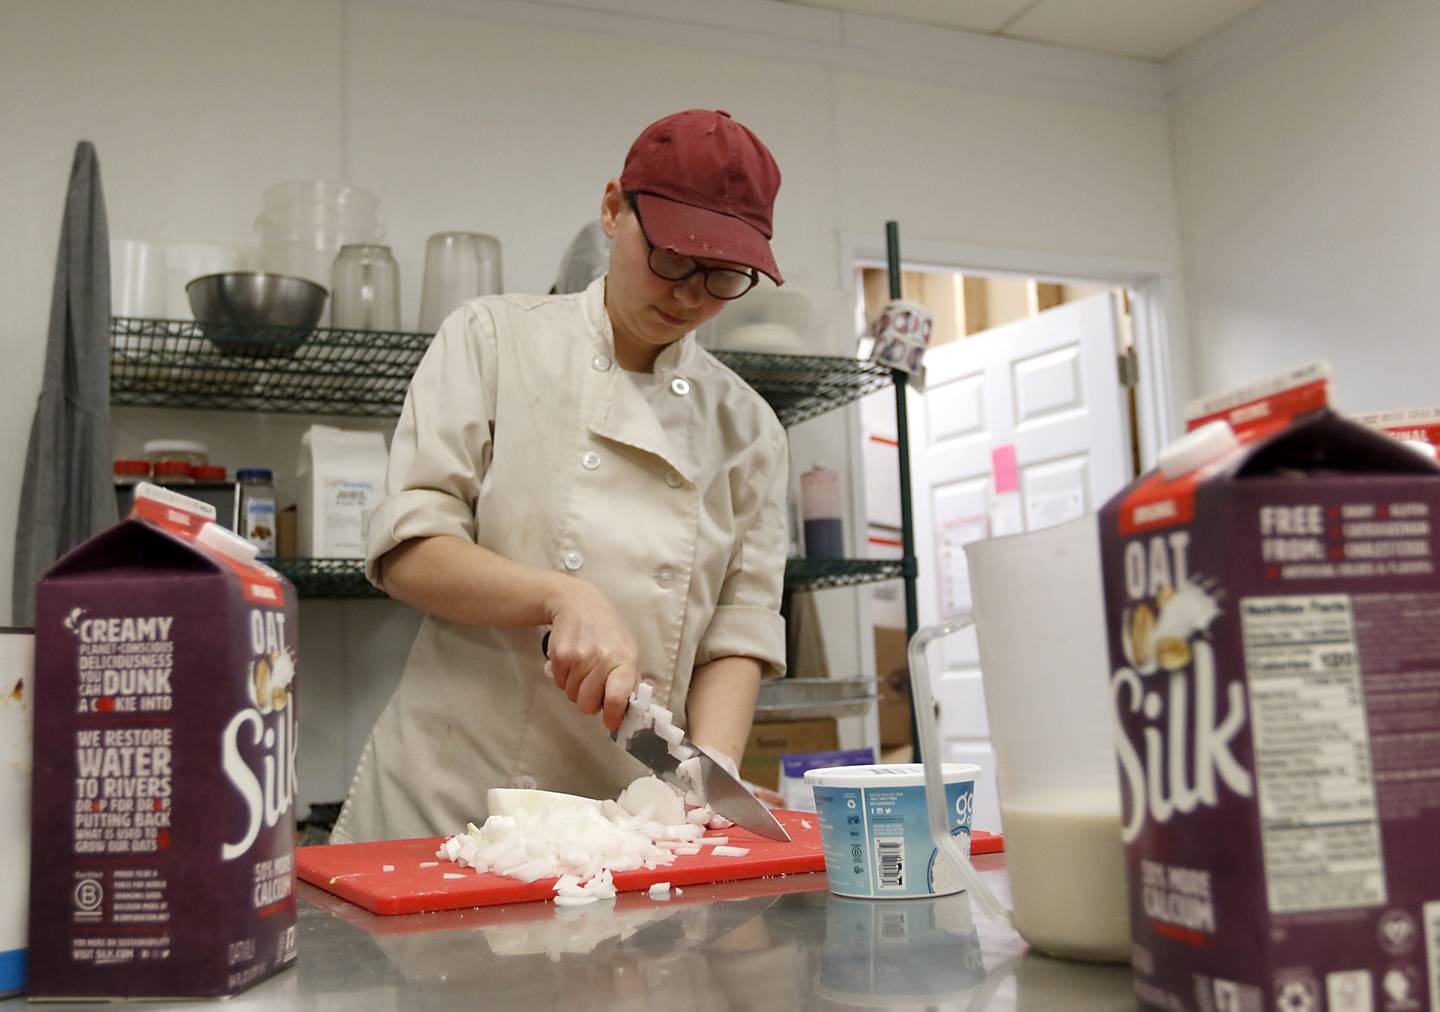 Corinna Sac, the owner of UpRising Bakery and Cafe, chops an onion Tuesday, Oct. 4, 2022, while working in the kitchen of the bakery and cafe at 2104 W. Algonquin Road in Lake in the Hills. After opening a bakery in 2021, Sac began hosting events to try and supplement her business' income. One of those events – a drag brunch – led to threats and vandalism but also an outpouring of support.